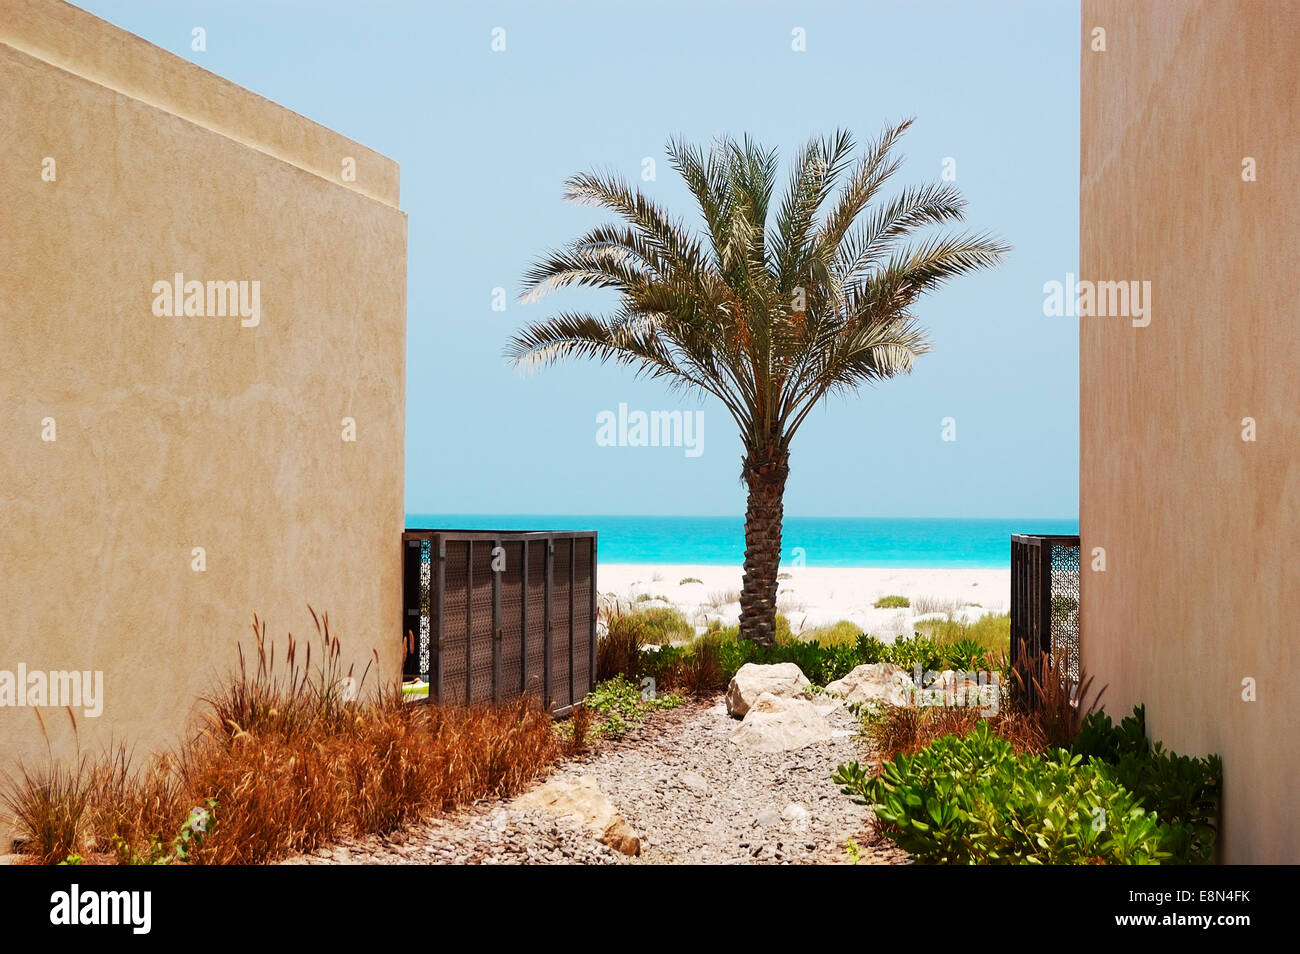 The view on a beach from arabic style modern villa at luxury hotel, Abu Dhabi, UAE Stock Photo